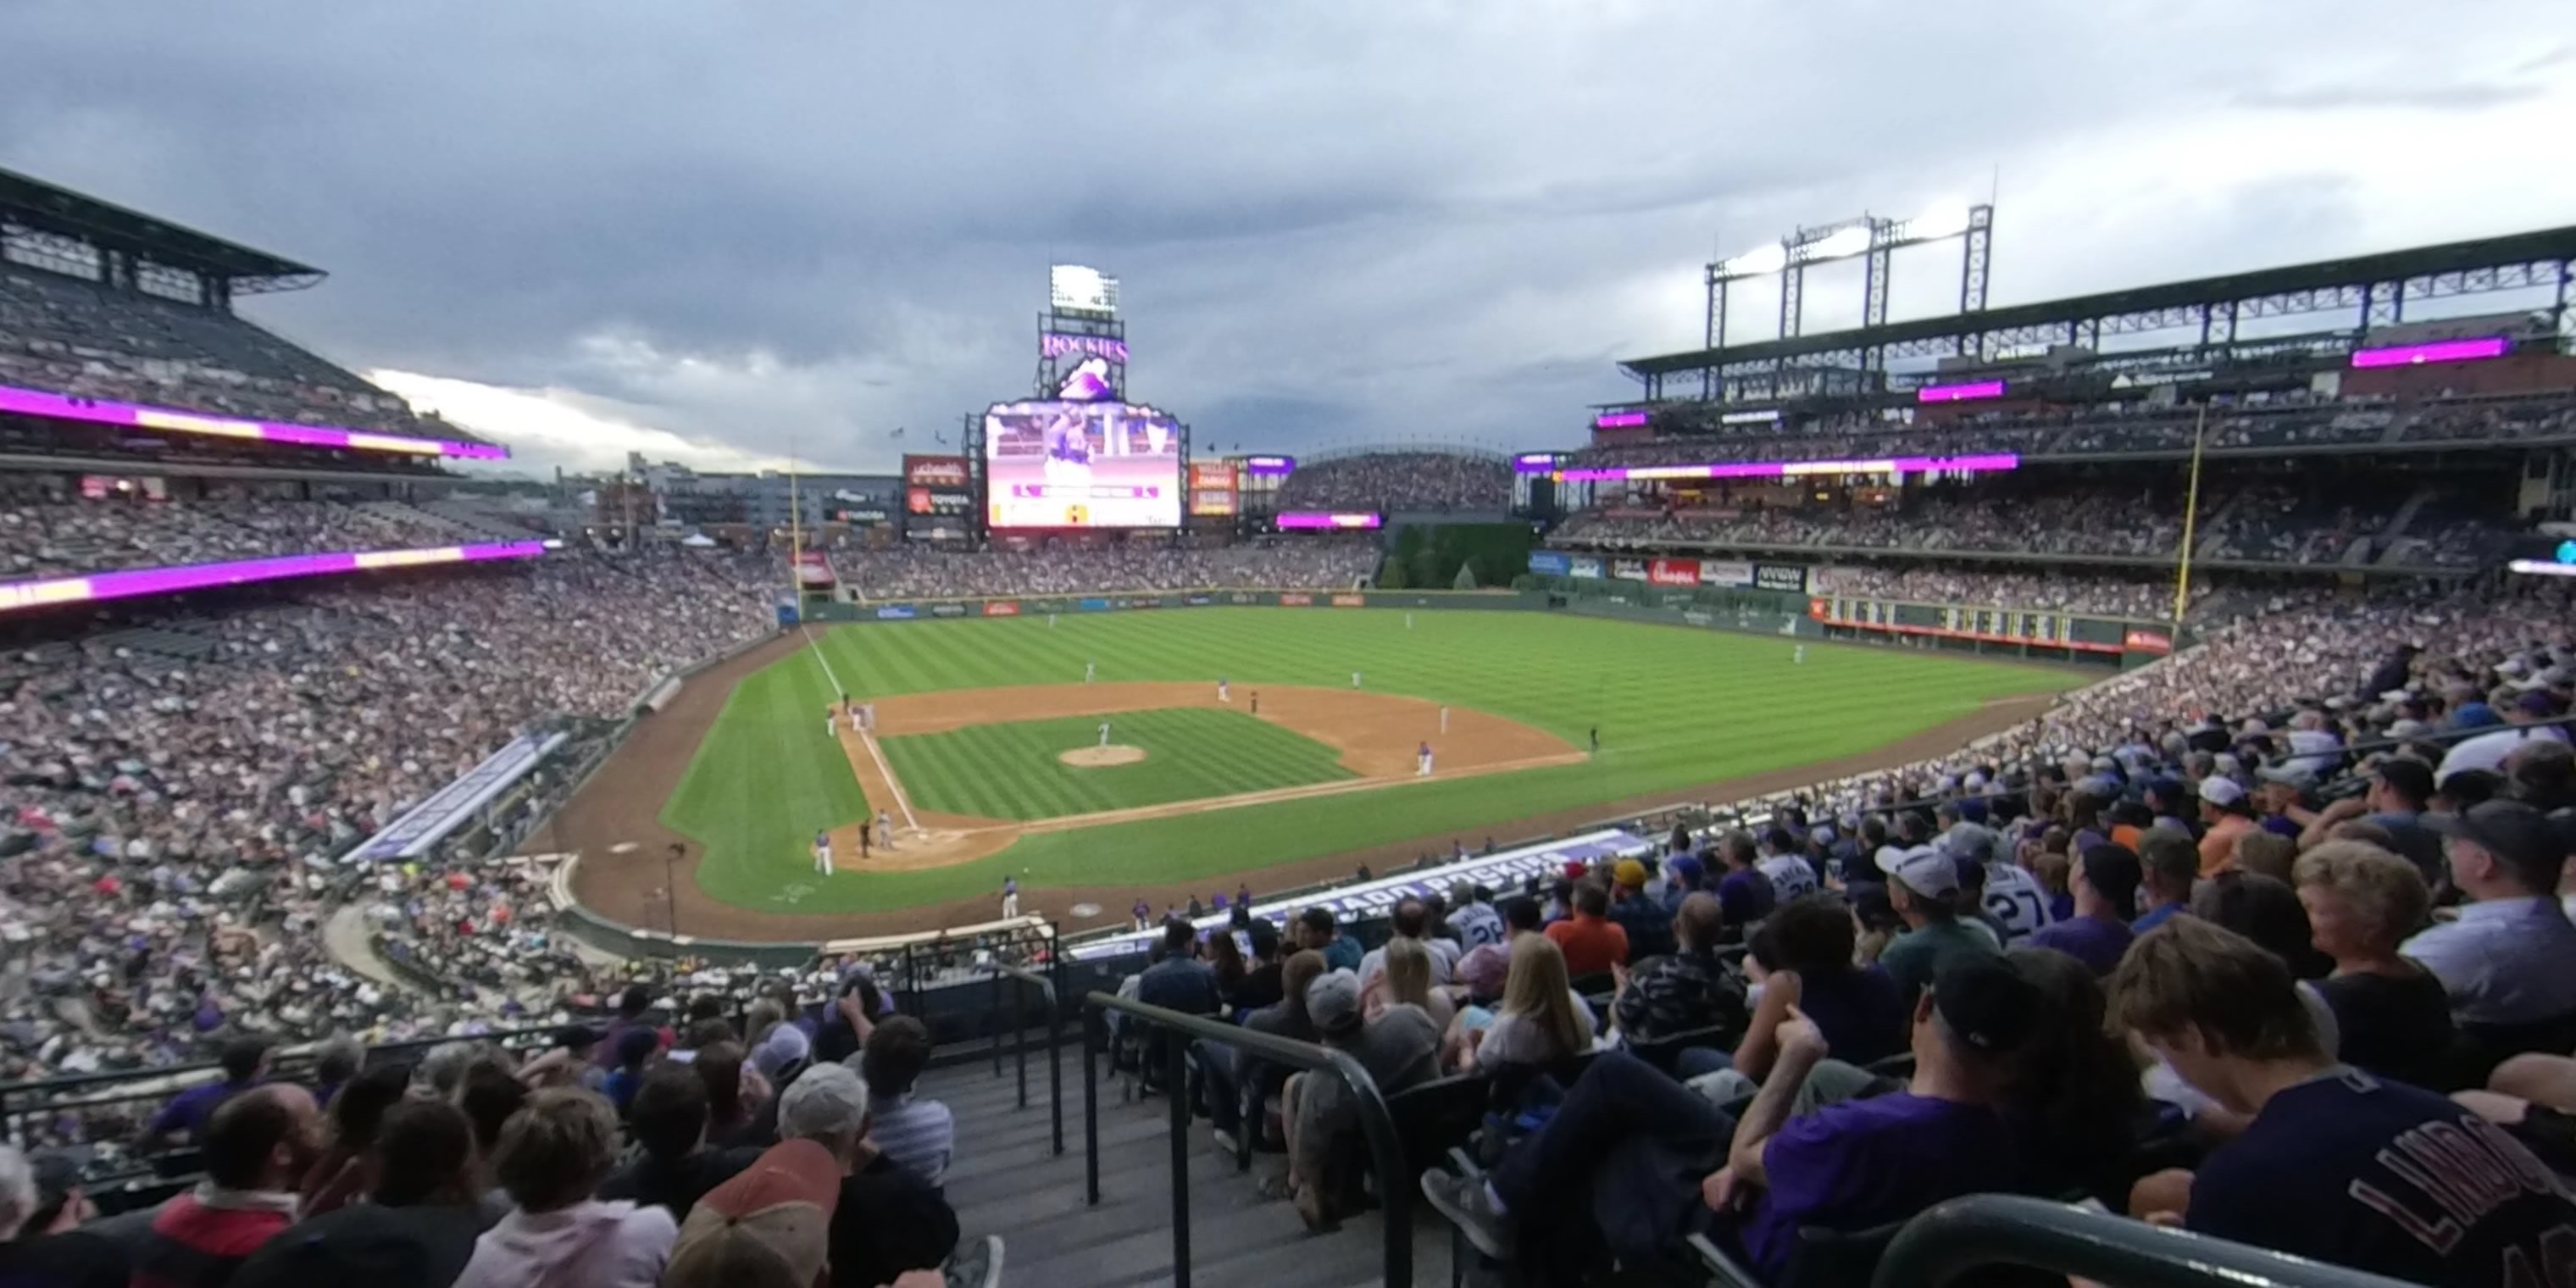 Section 226 At Coors Field Rateyourseats Com